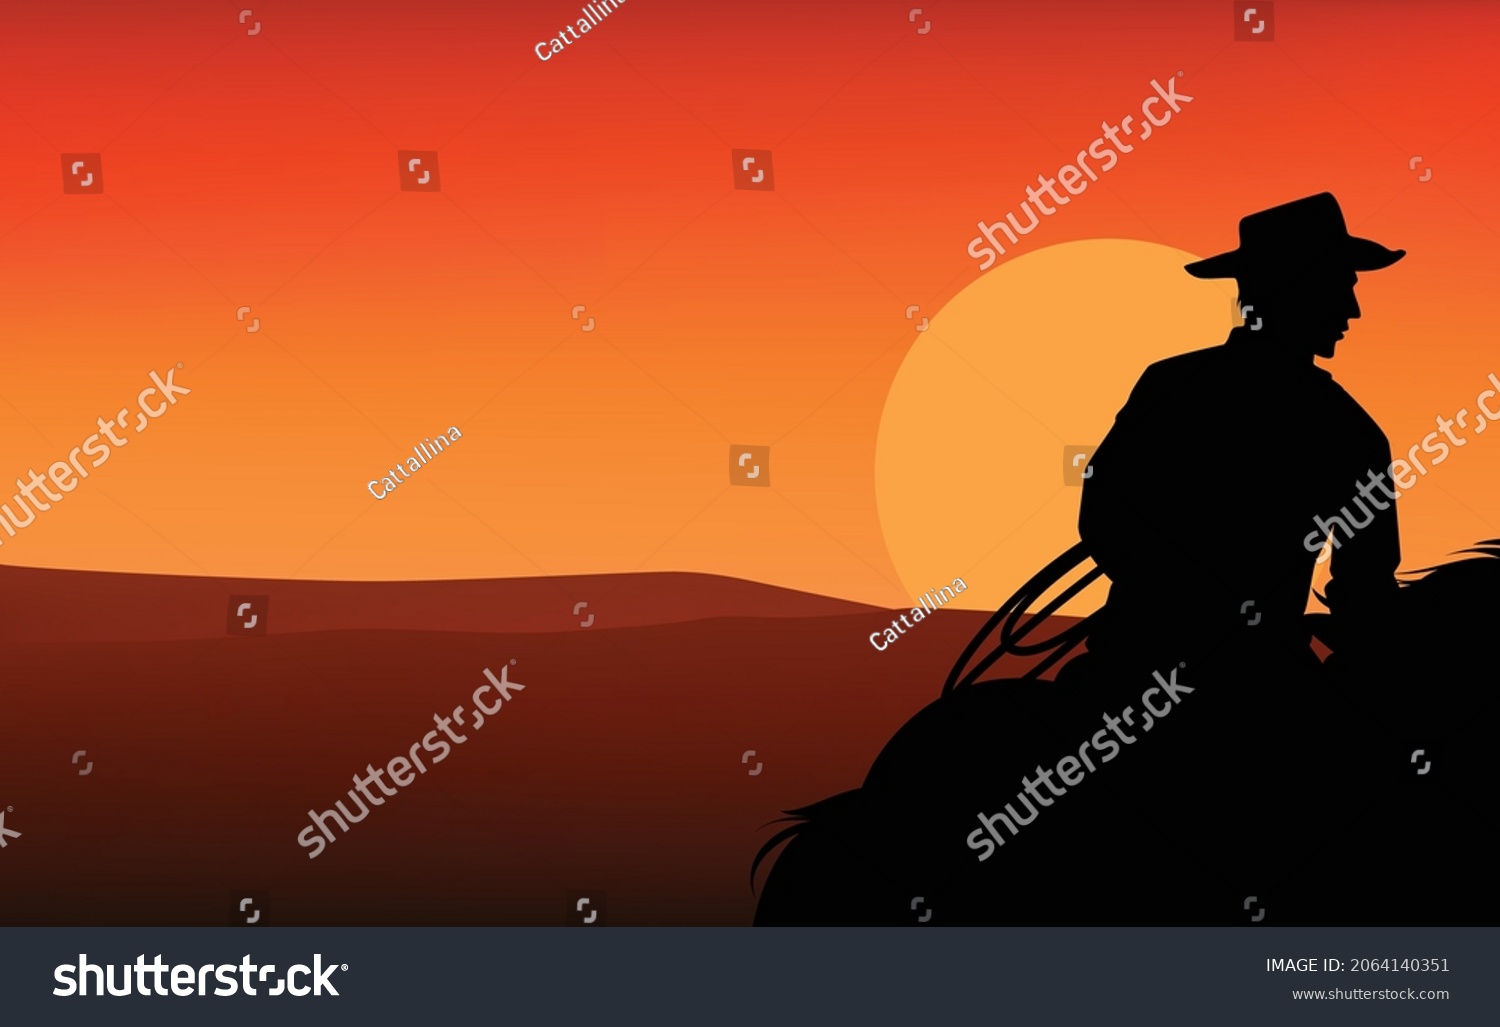 SVG of horseback cowboy with lasso against dramatic sunset sky - wild west ranger riding horse vector silhouette copy space design svg